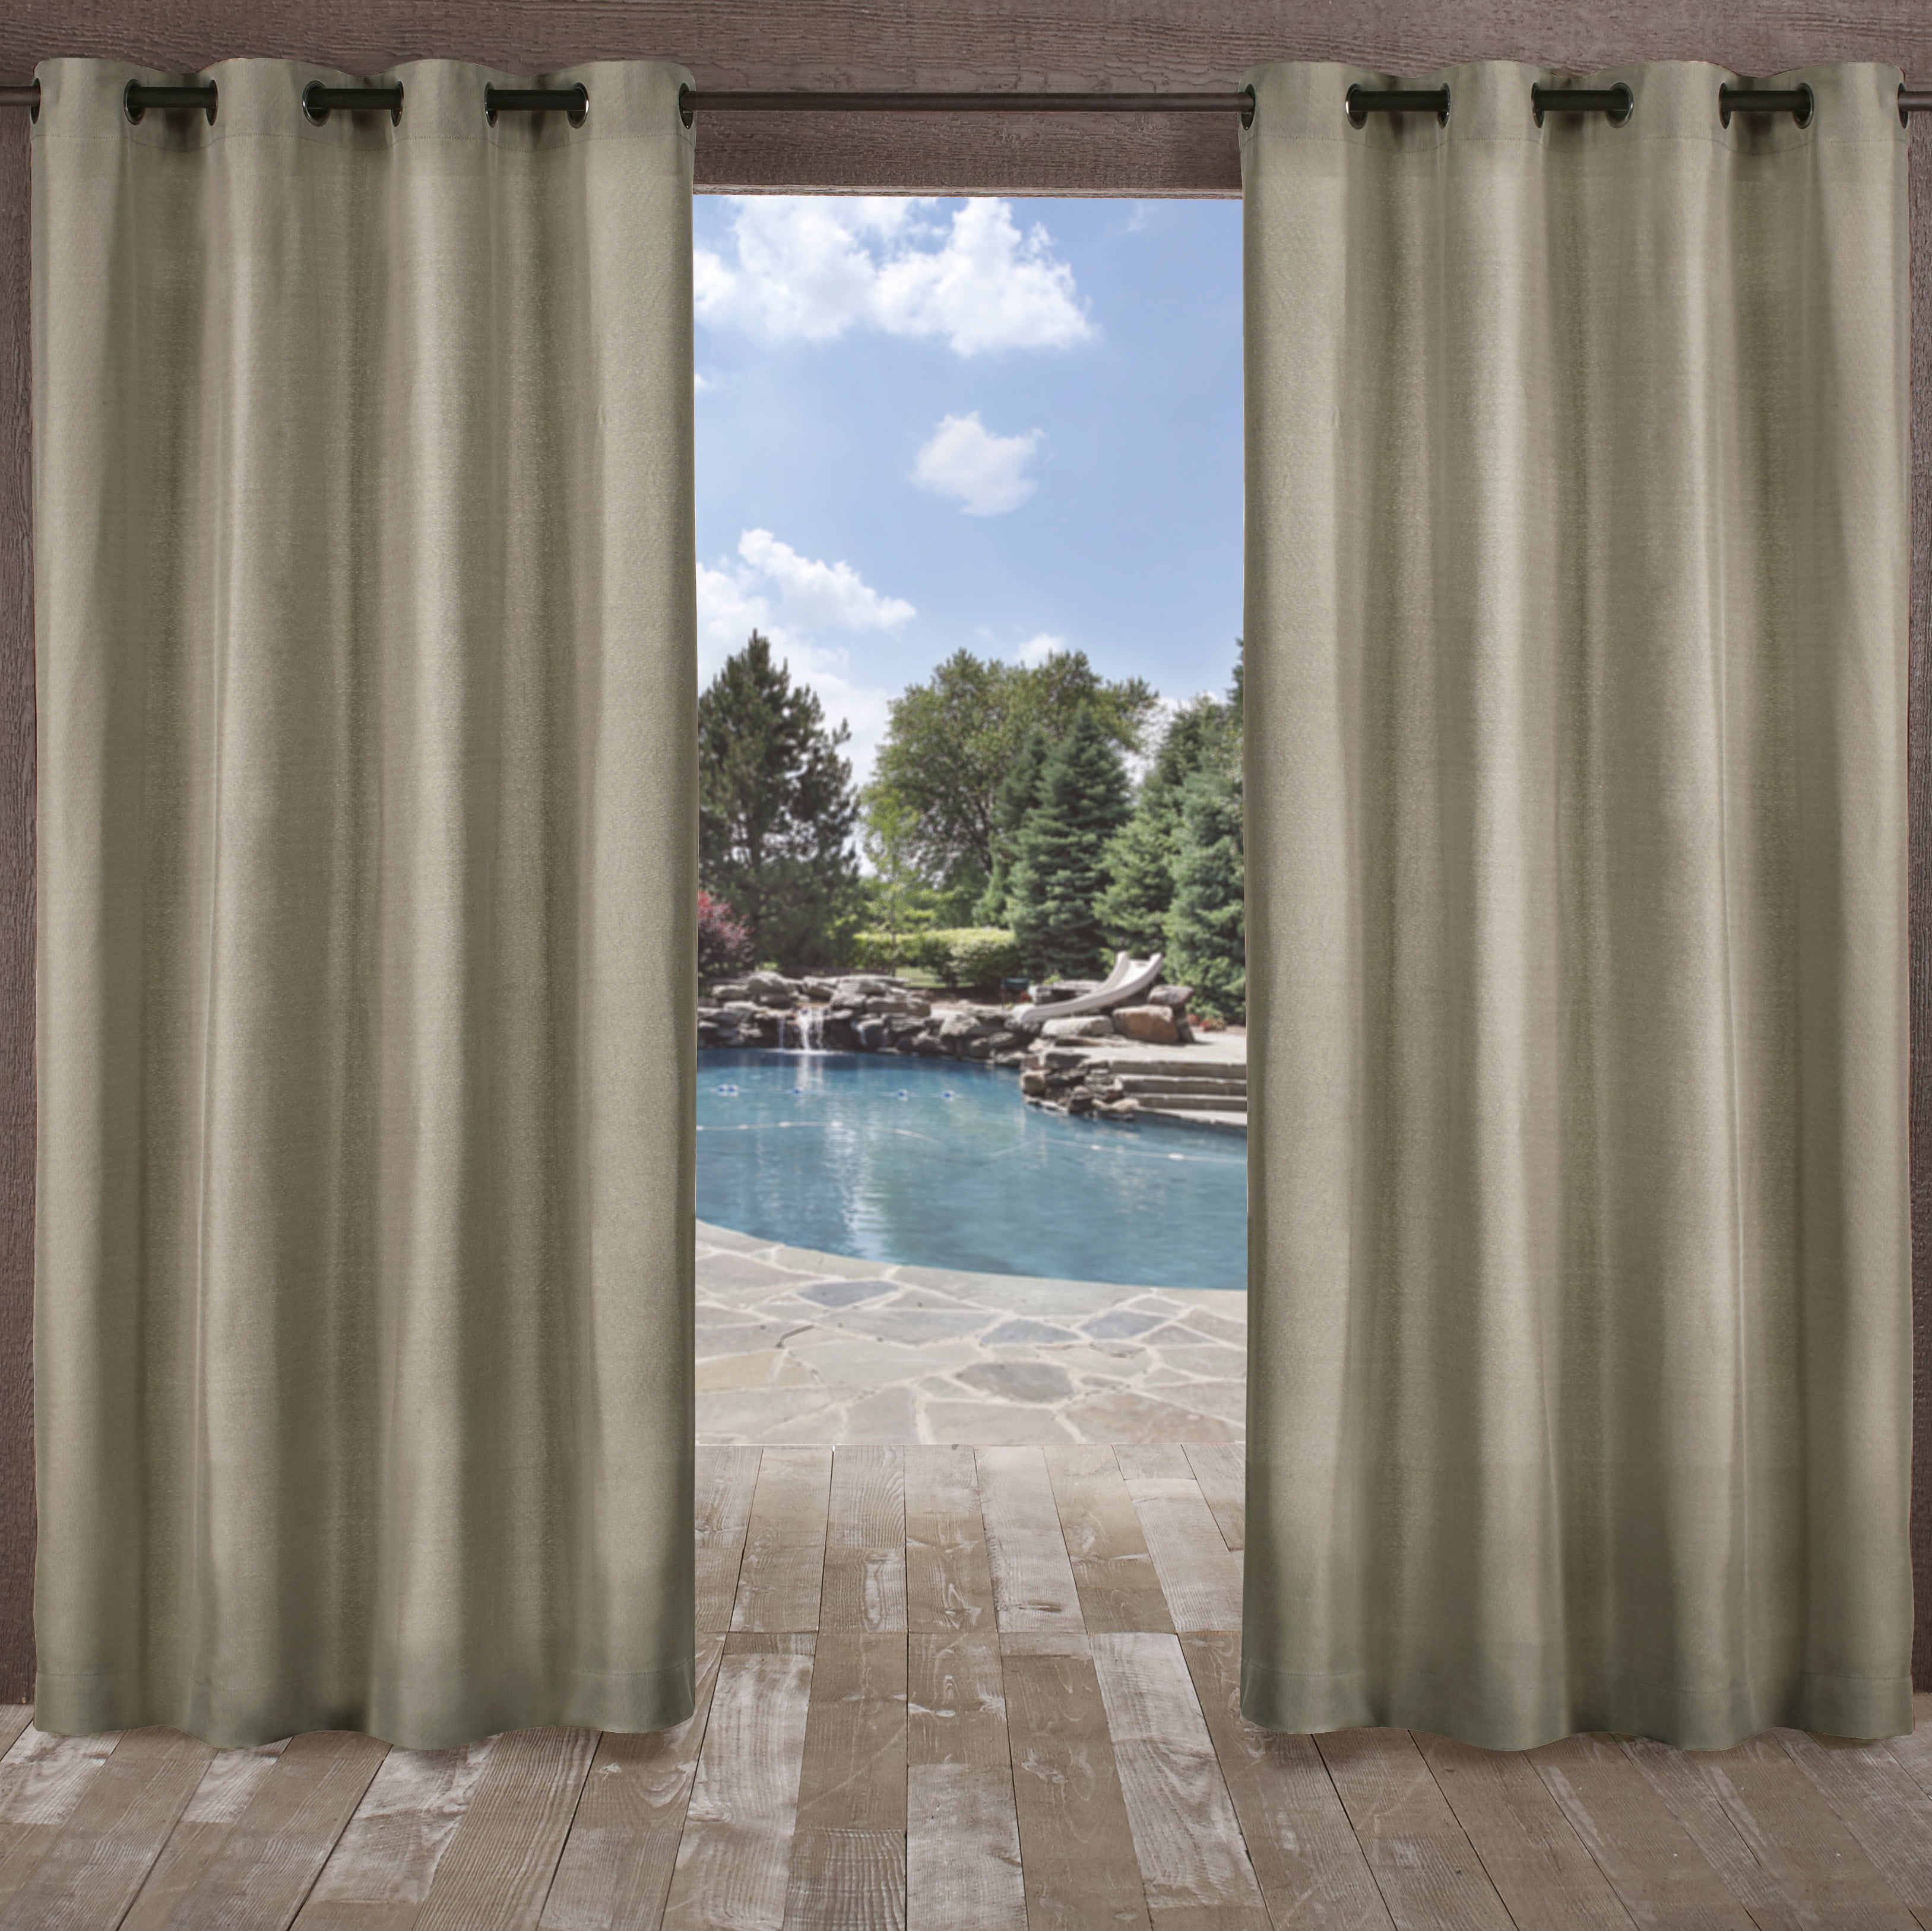 50 Wide by 96 Long Raffia Outdoor Curtain with Grommets